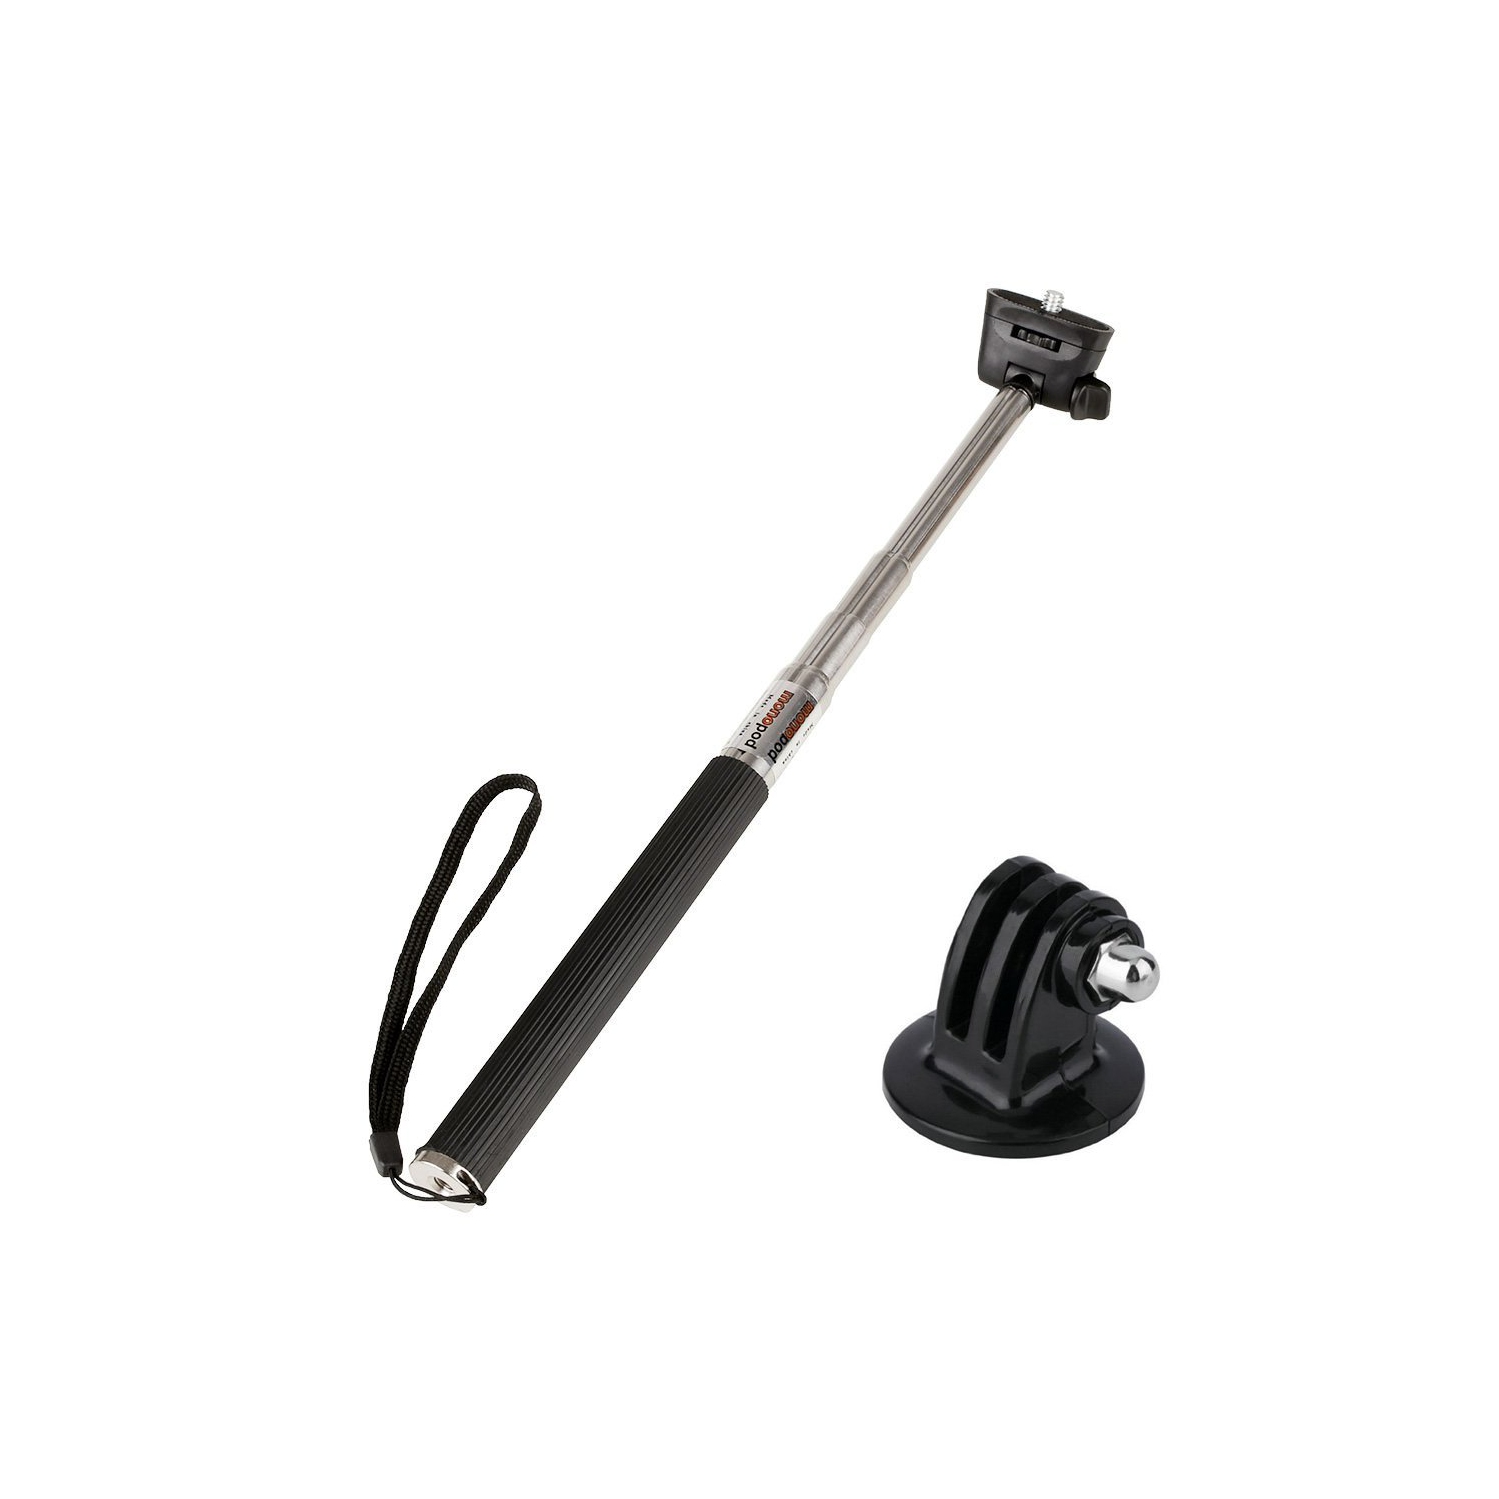 Ultimaxx Selfie Stick Monopod with Adapter For DSLR, SLR And All GoPro Cameras, Collapses to 8.6 Extend to 40 Inch